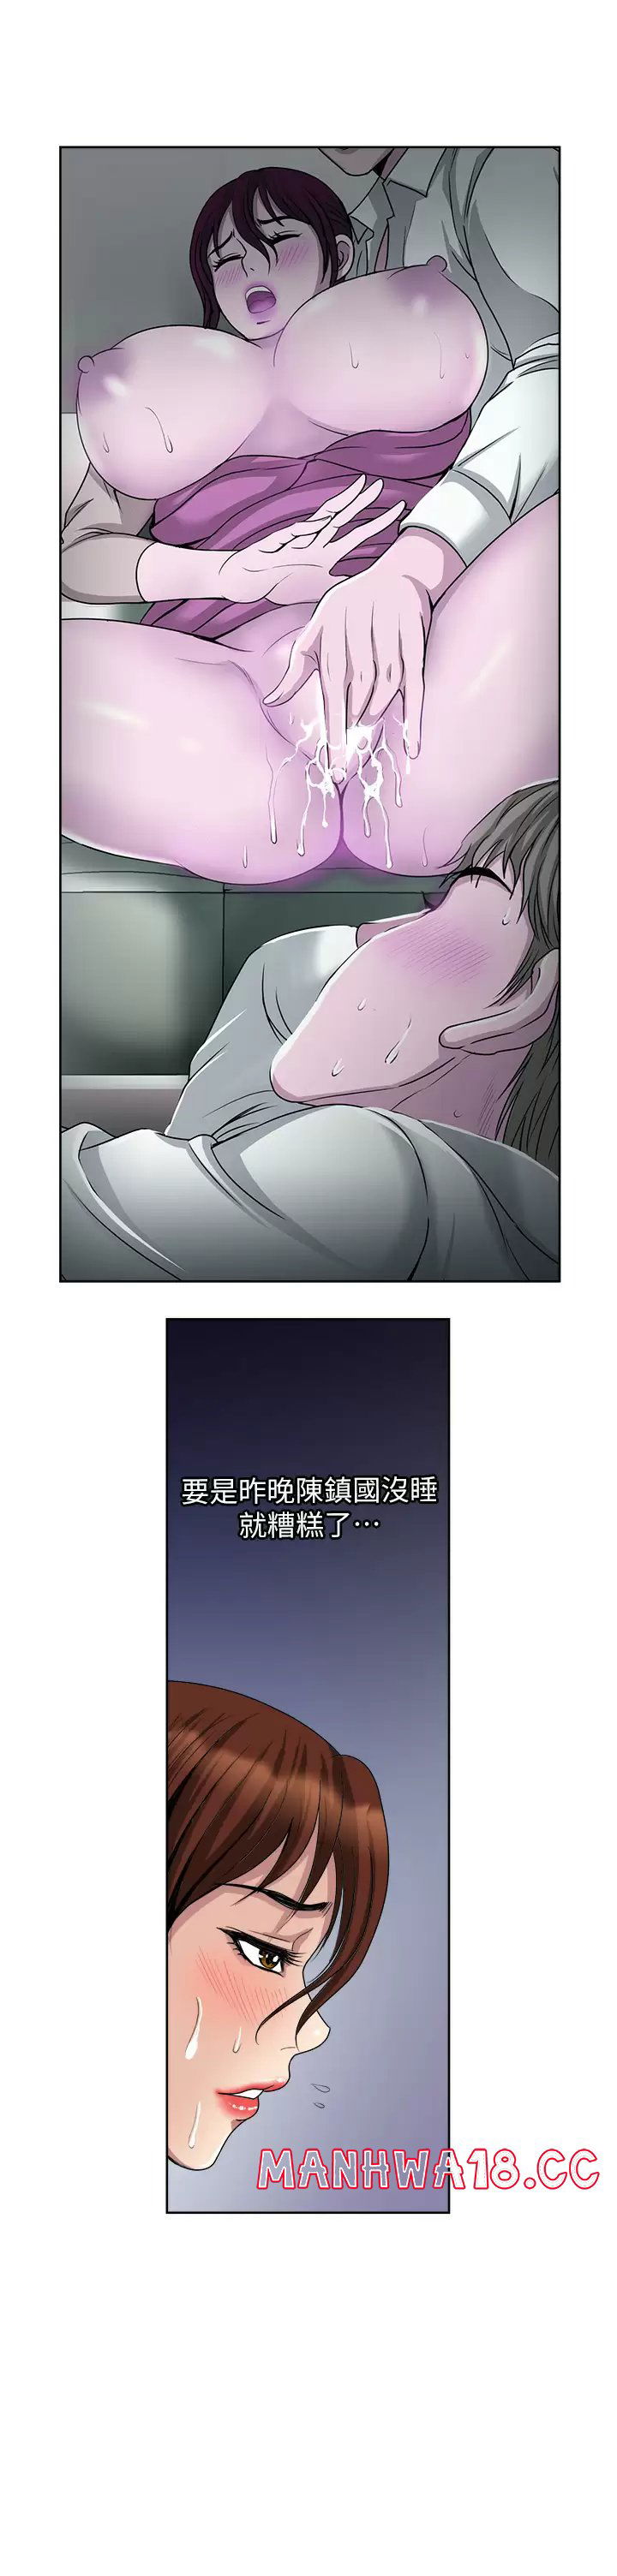 just-once-raw-chap-28-18